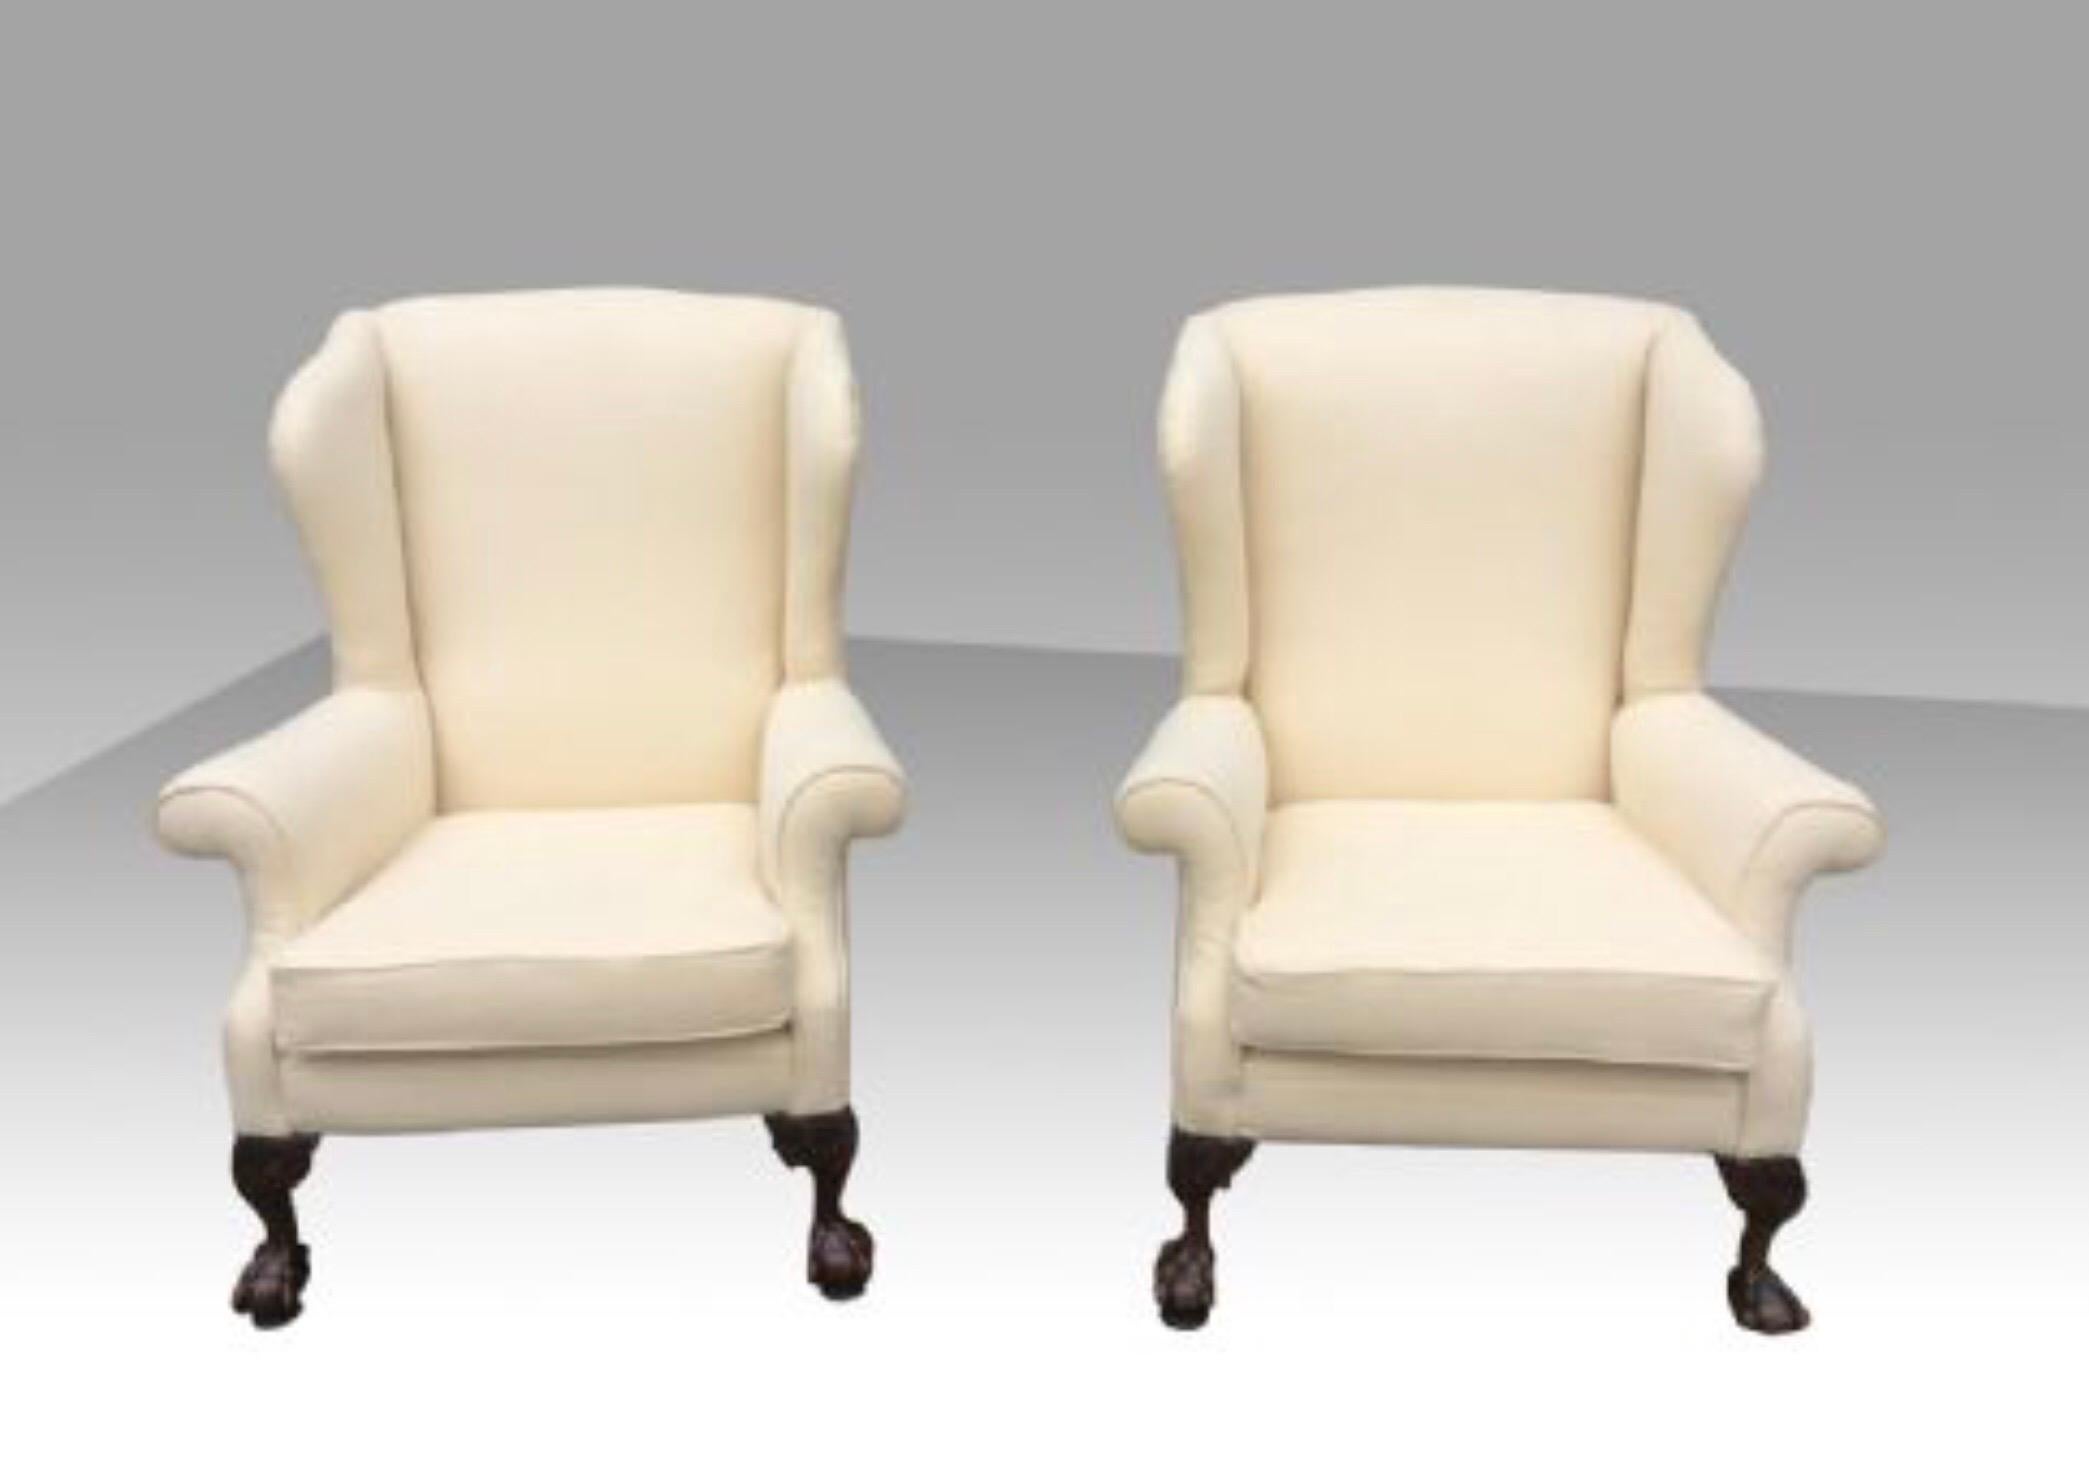 Superb pair of antique wing back Wingback arm chairs with mahogany ball and claw feet,beautifully and expertly re upholstered in a lovely cream wearable material.
The chairs sit on swivel Bakelite glides for ease of movement and to prevent damage